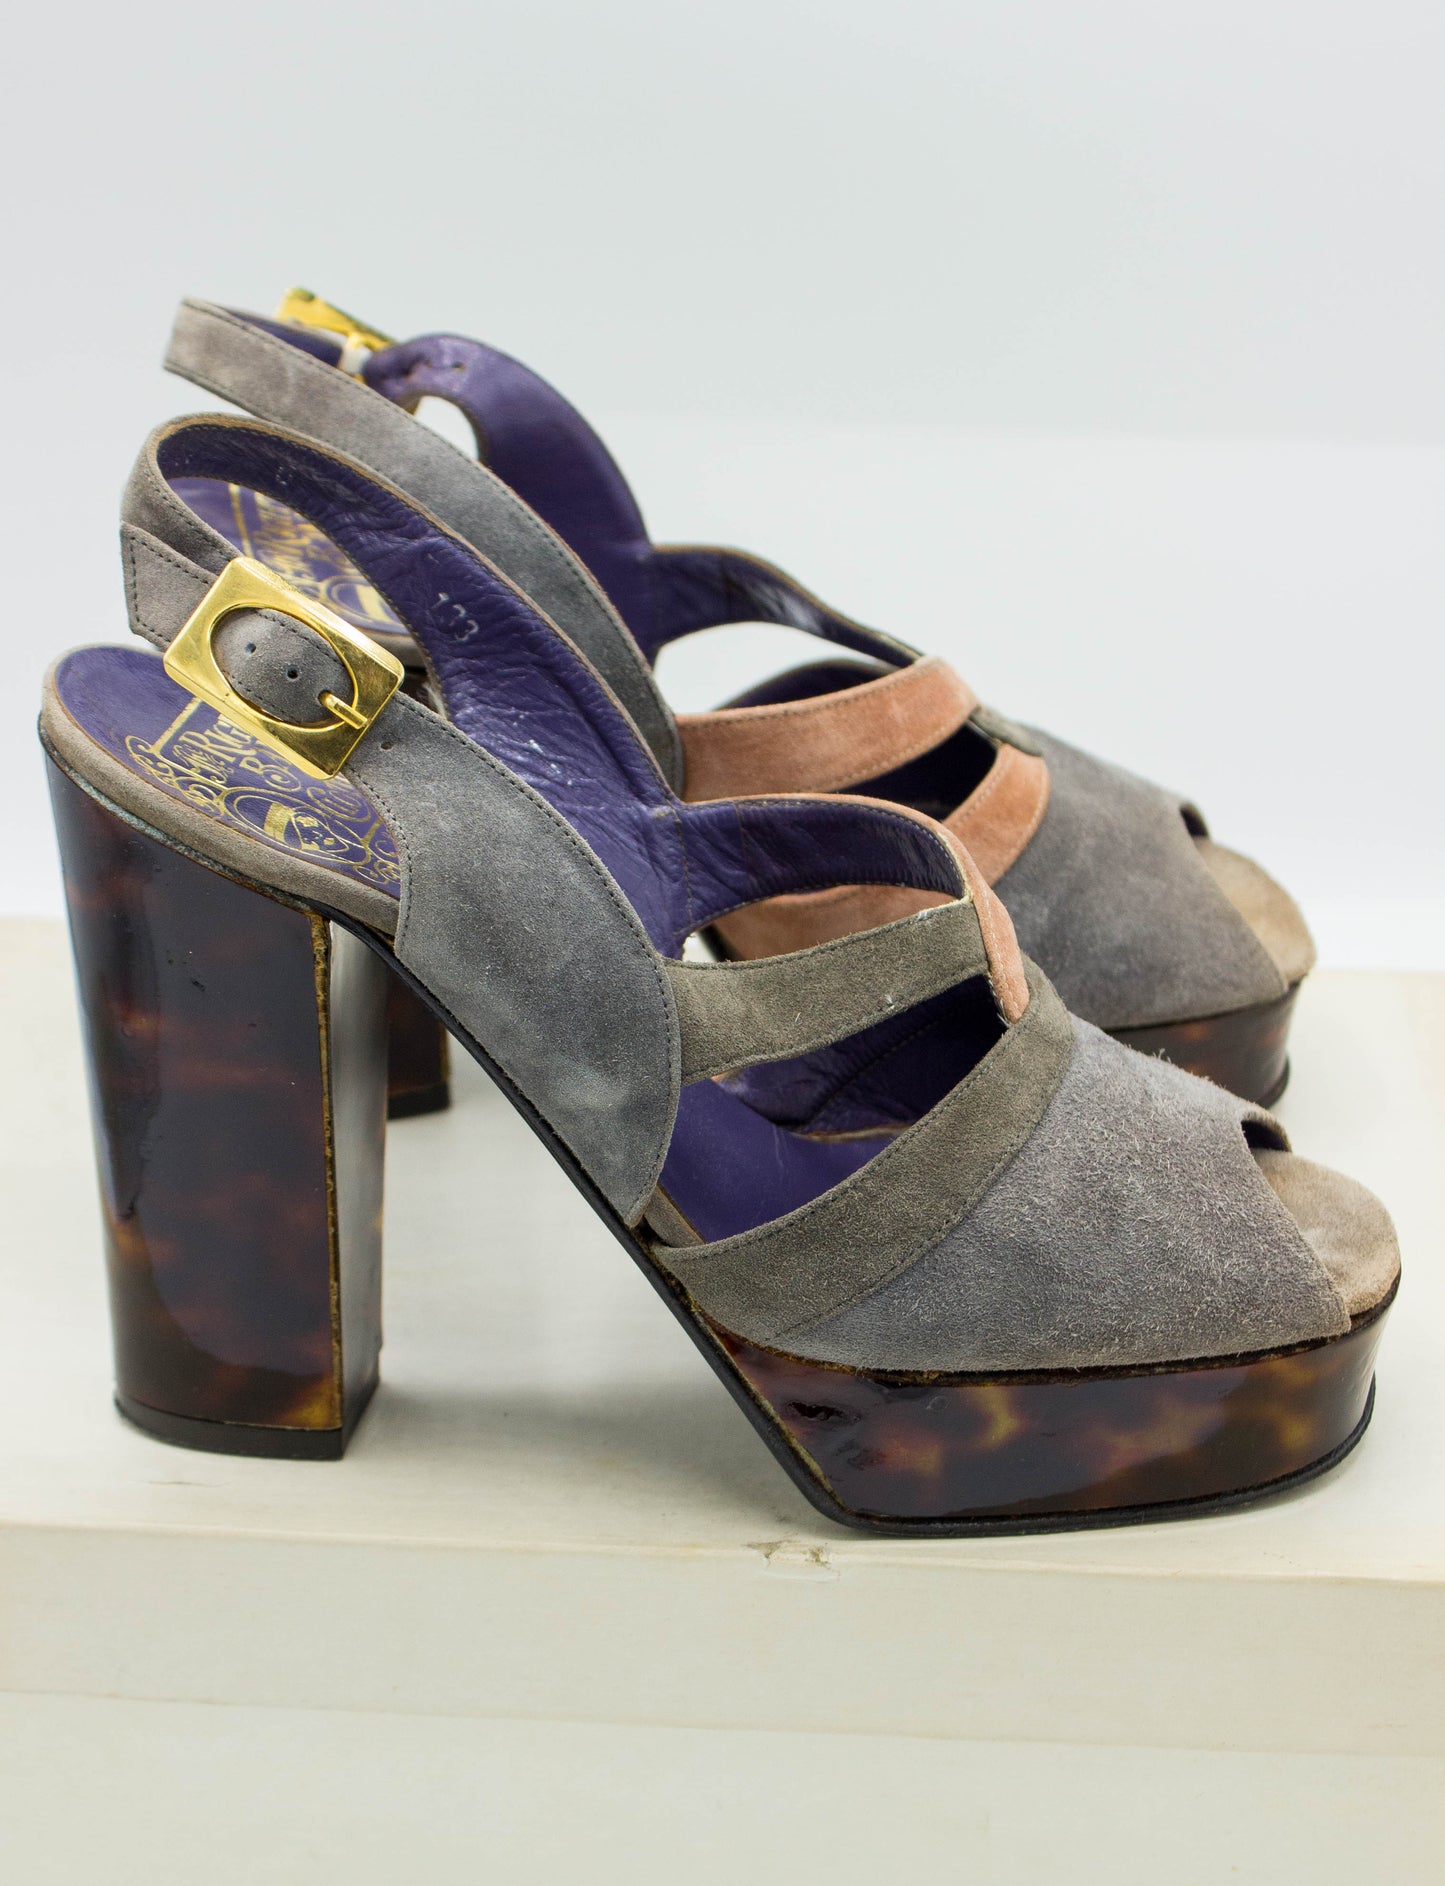 Vintage 1971 The Right Bank Clothing Co Rio Rose Grey Suede and Tortoise Strapped Heels Size 6